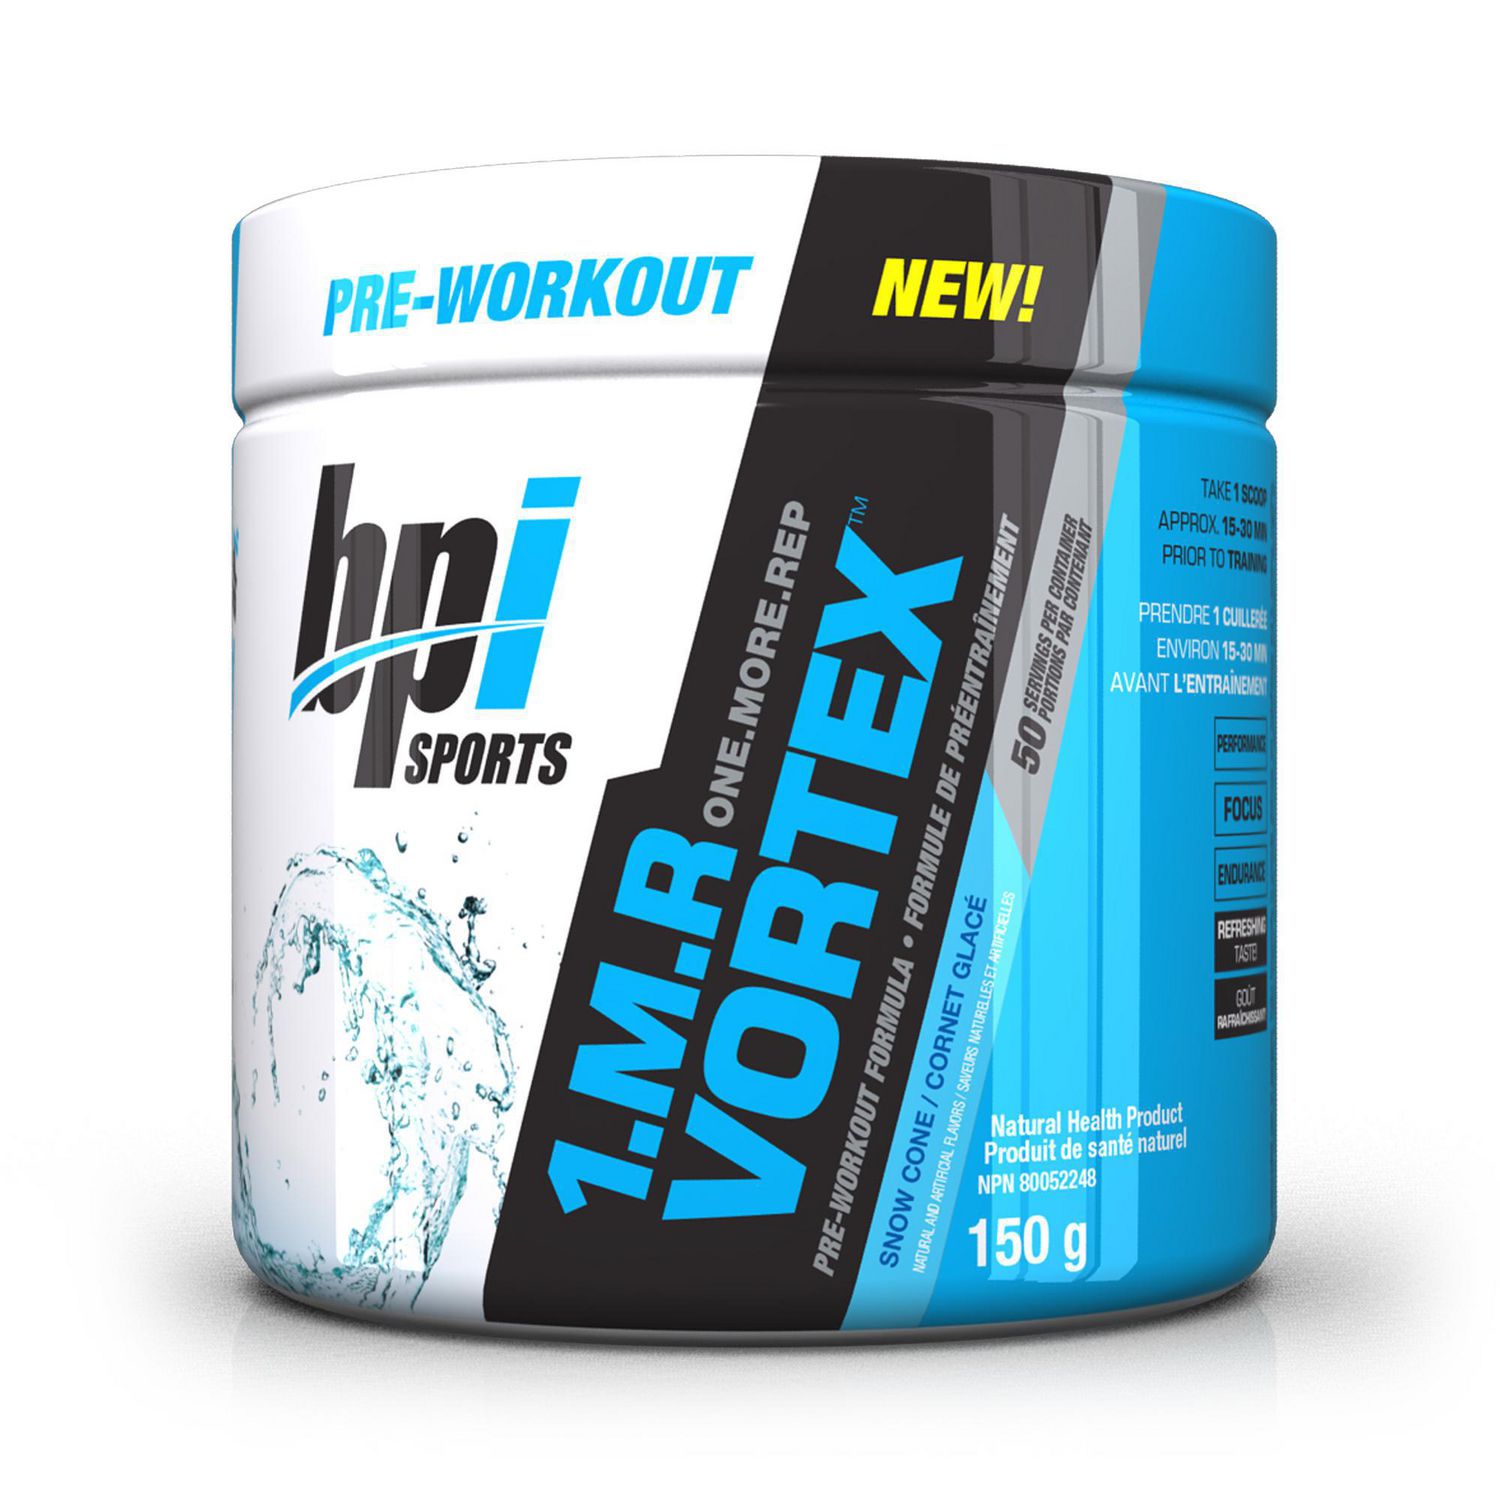 15 Minute Walmart Bpi Pre Workout for Push Pull Legs